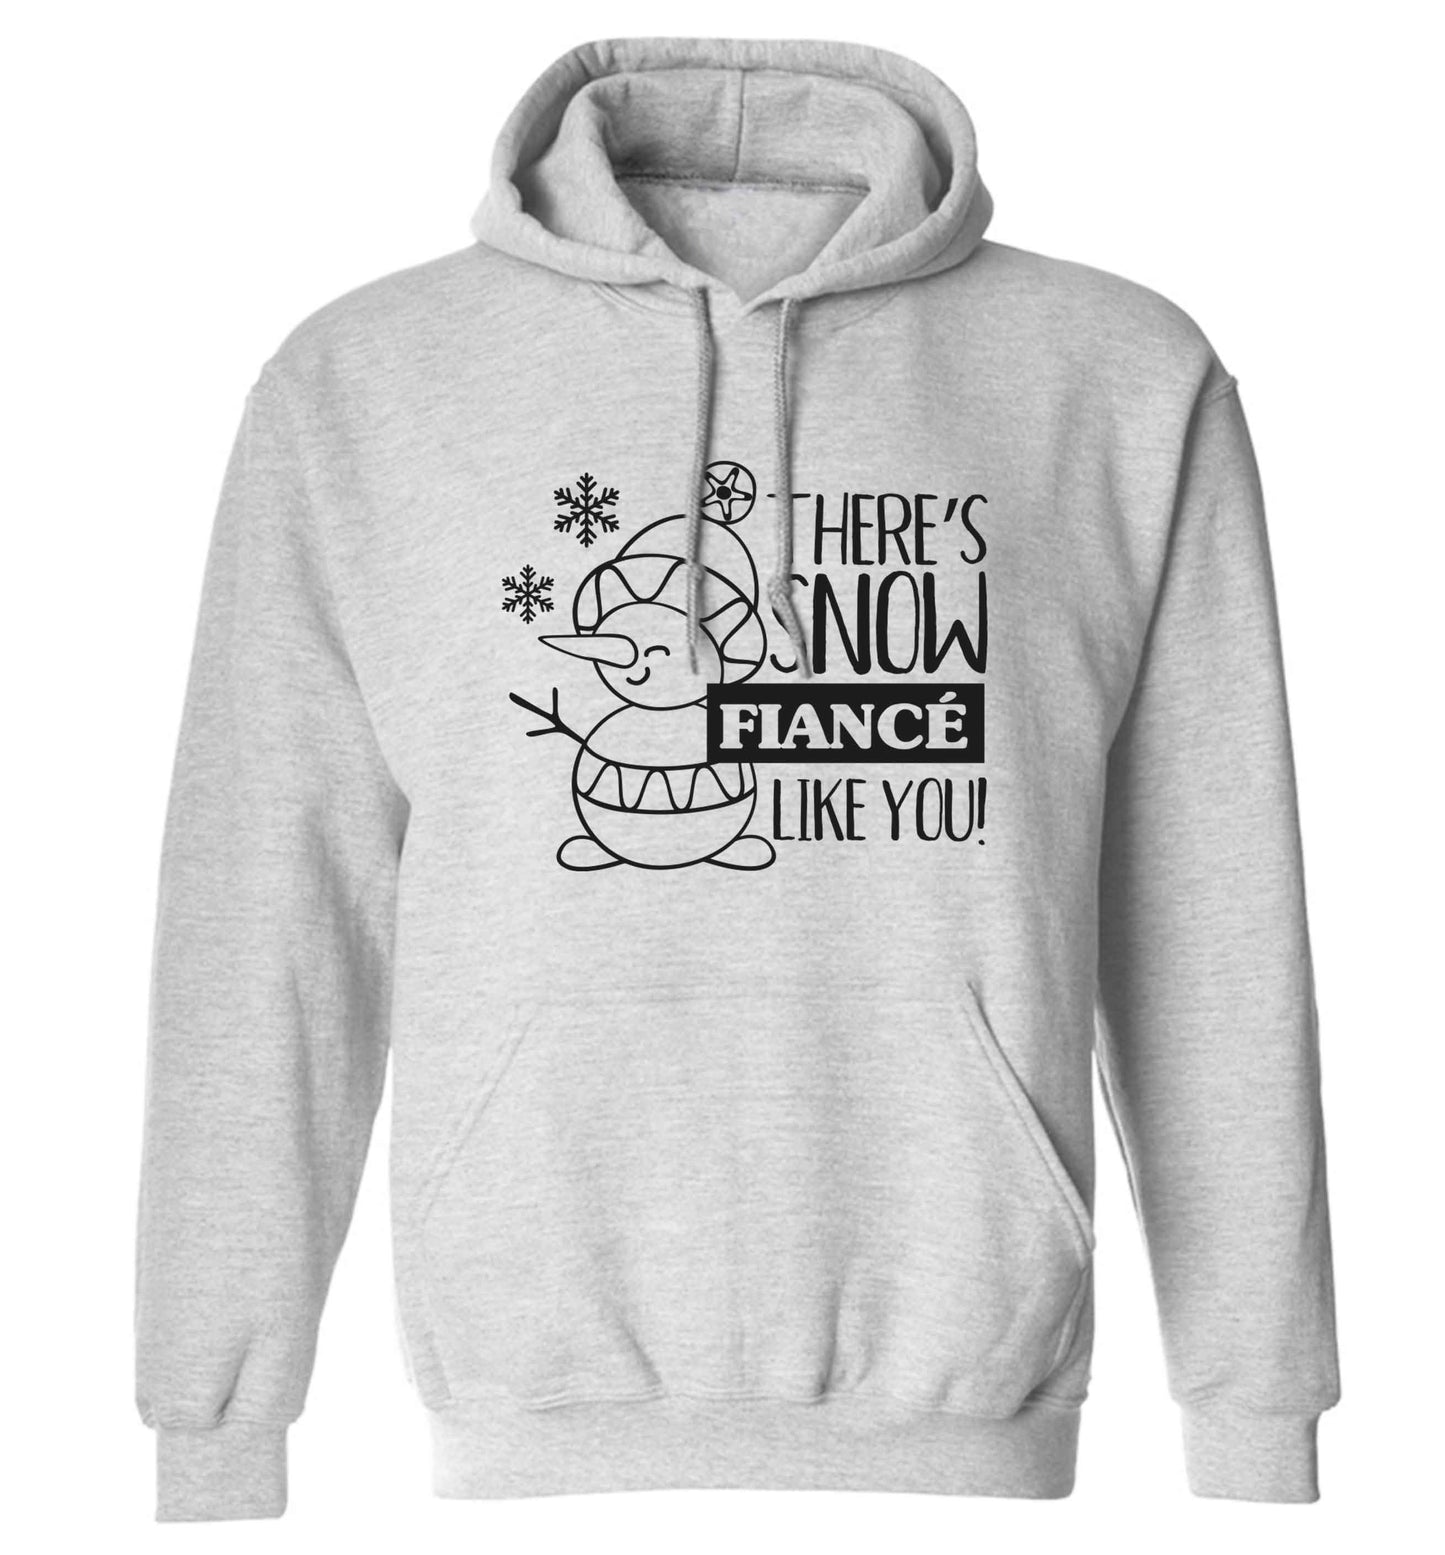 There's snow fiance like you adults unisex grey hoodie 2XL